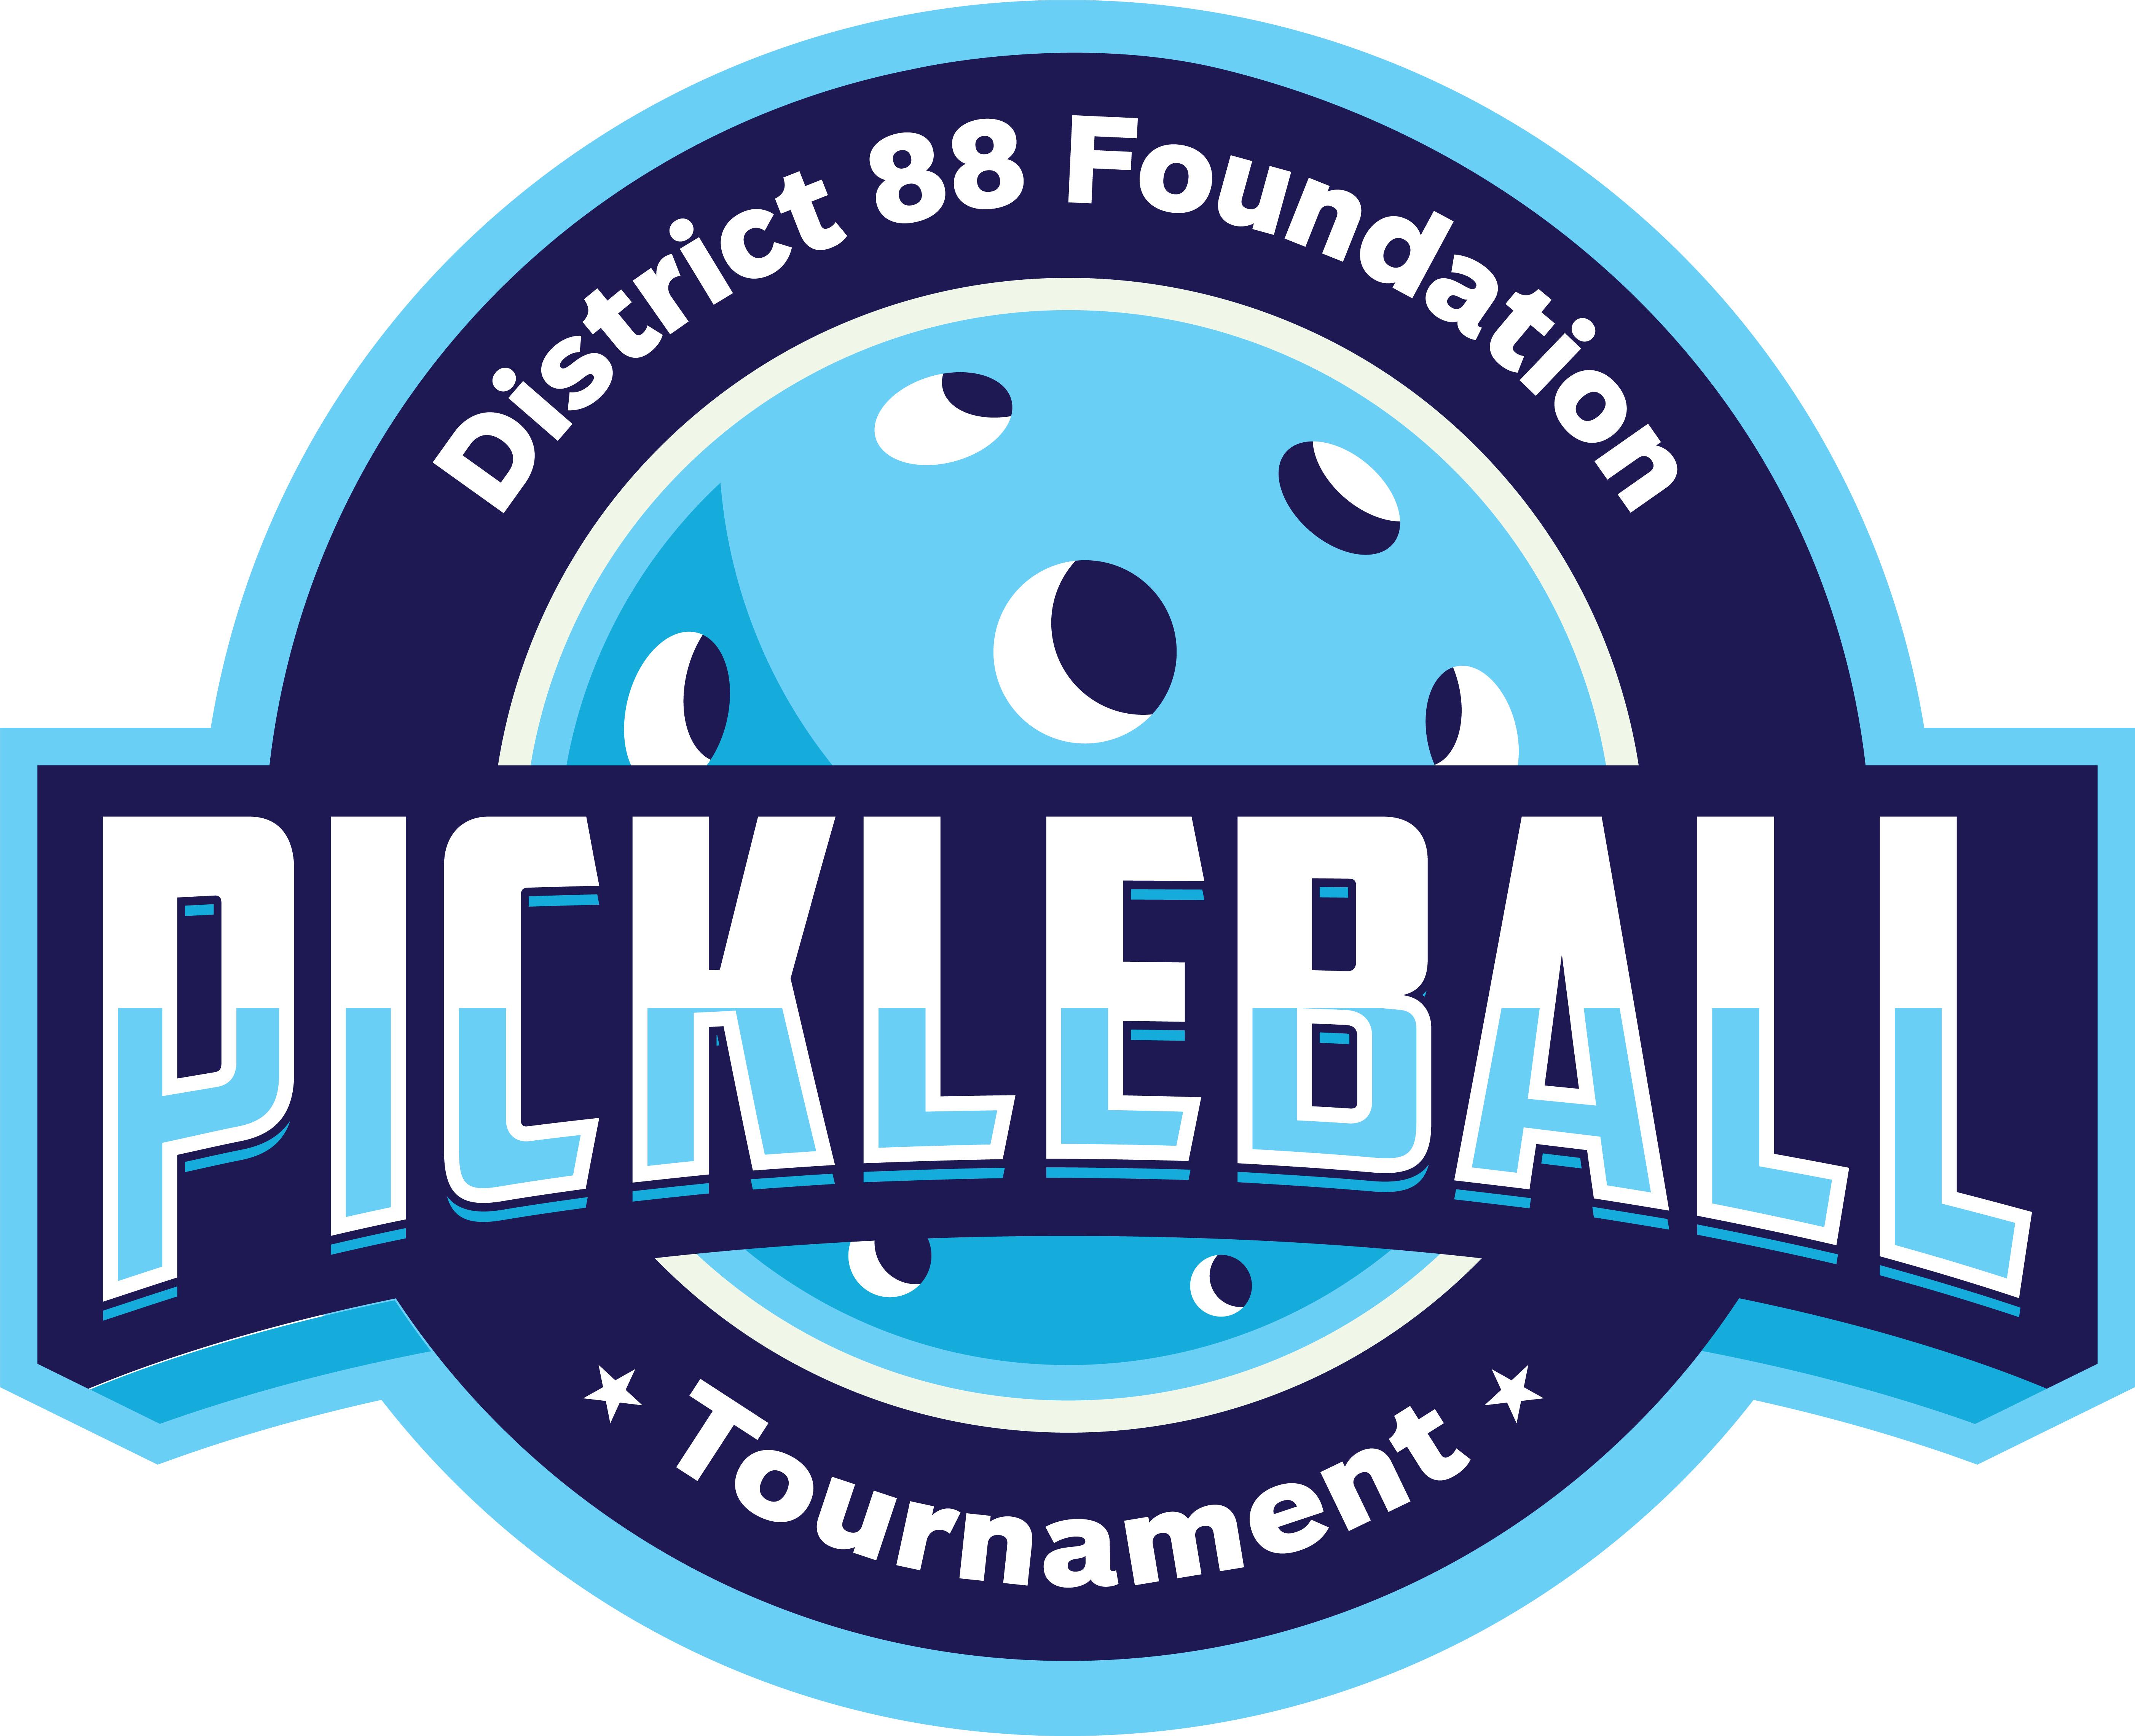 District 88 Board of Education thanks community for supporting District 88 Foundation’s first ‘Paddle Battle’ pickleball tournament